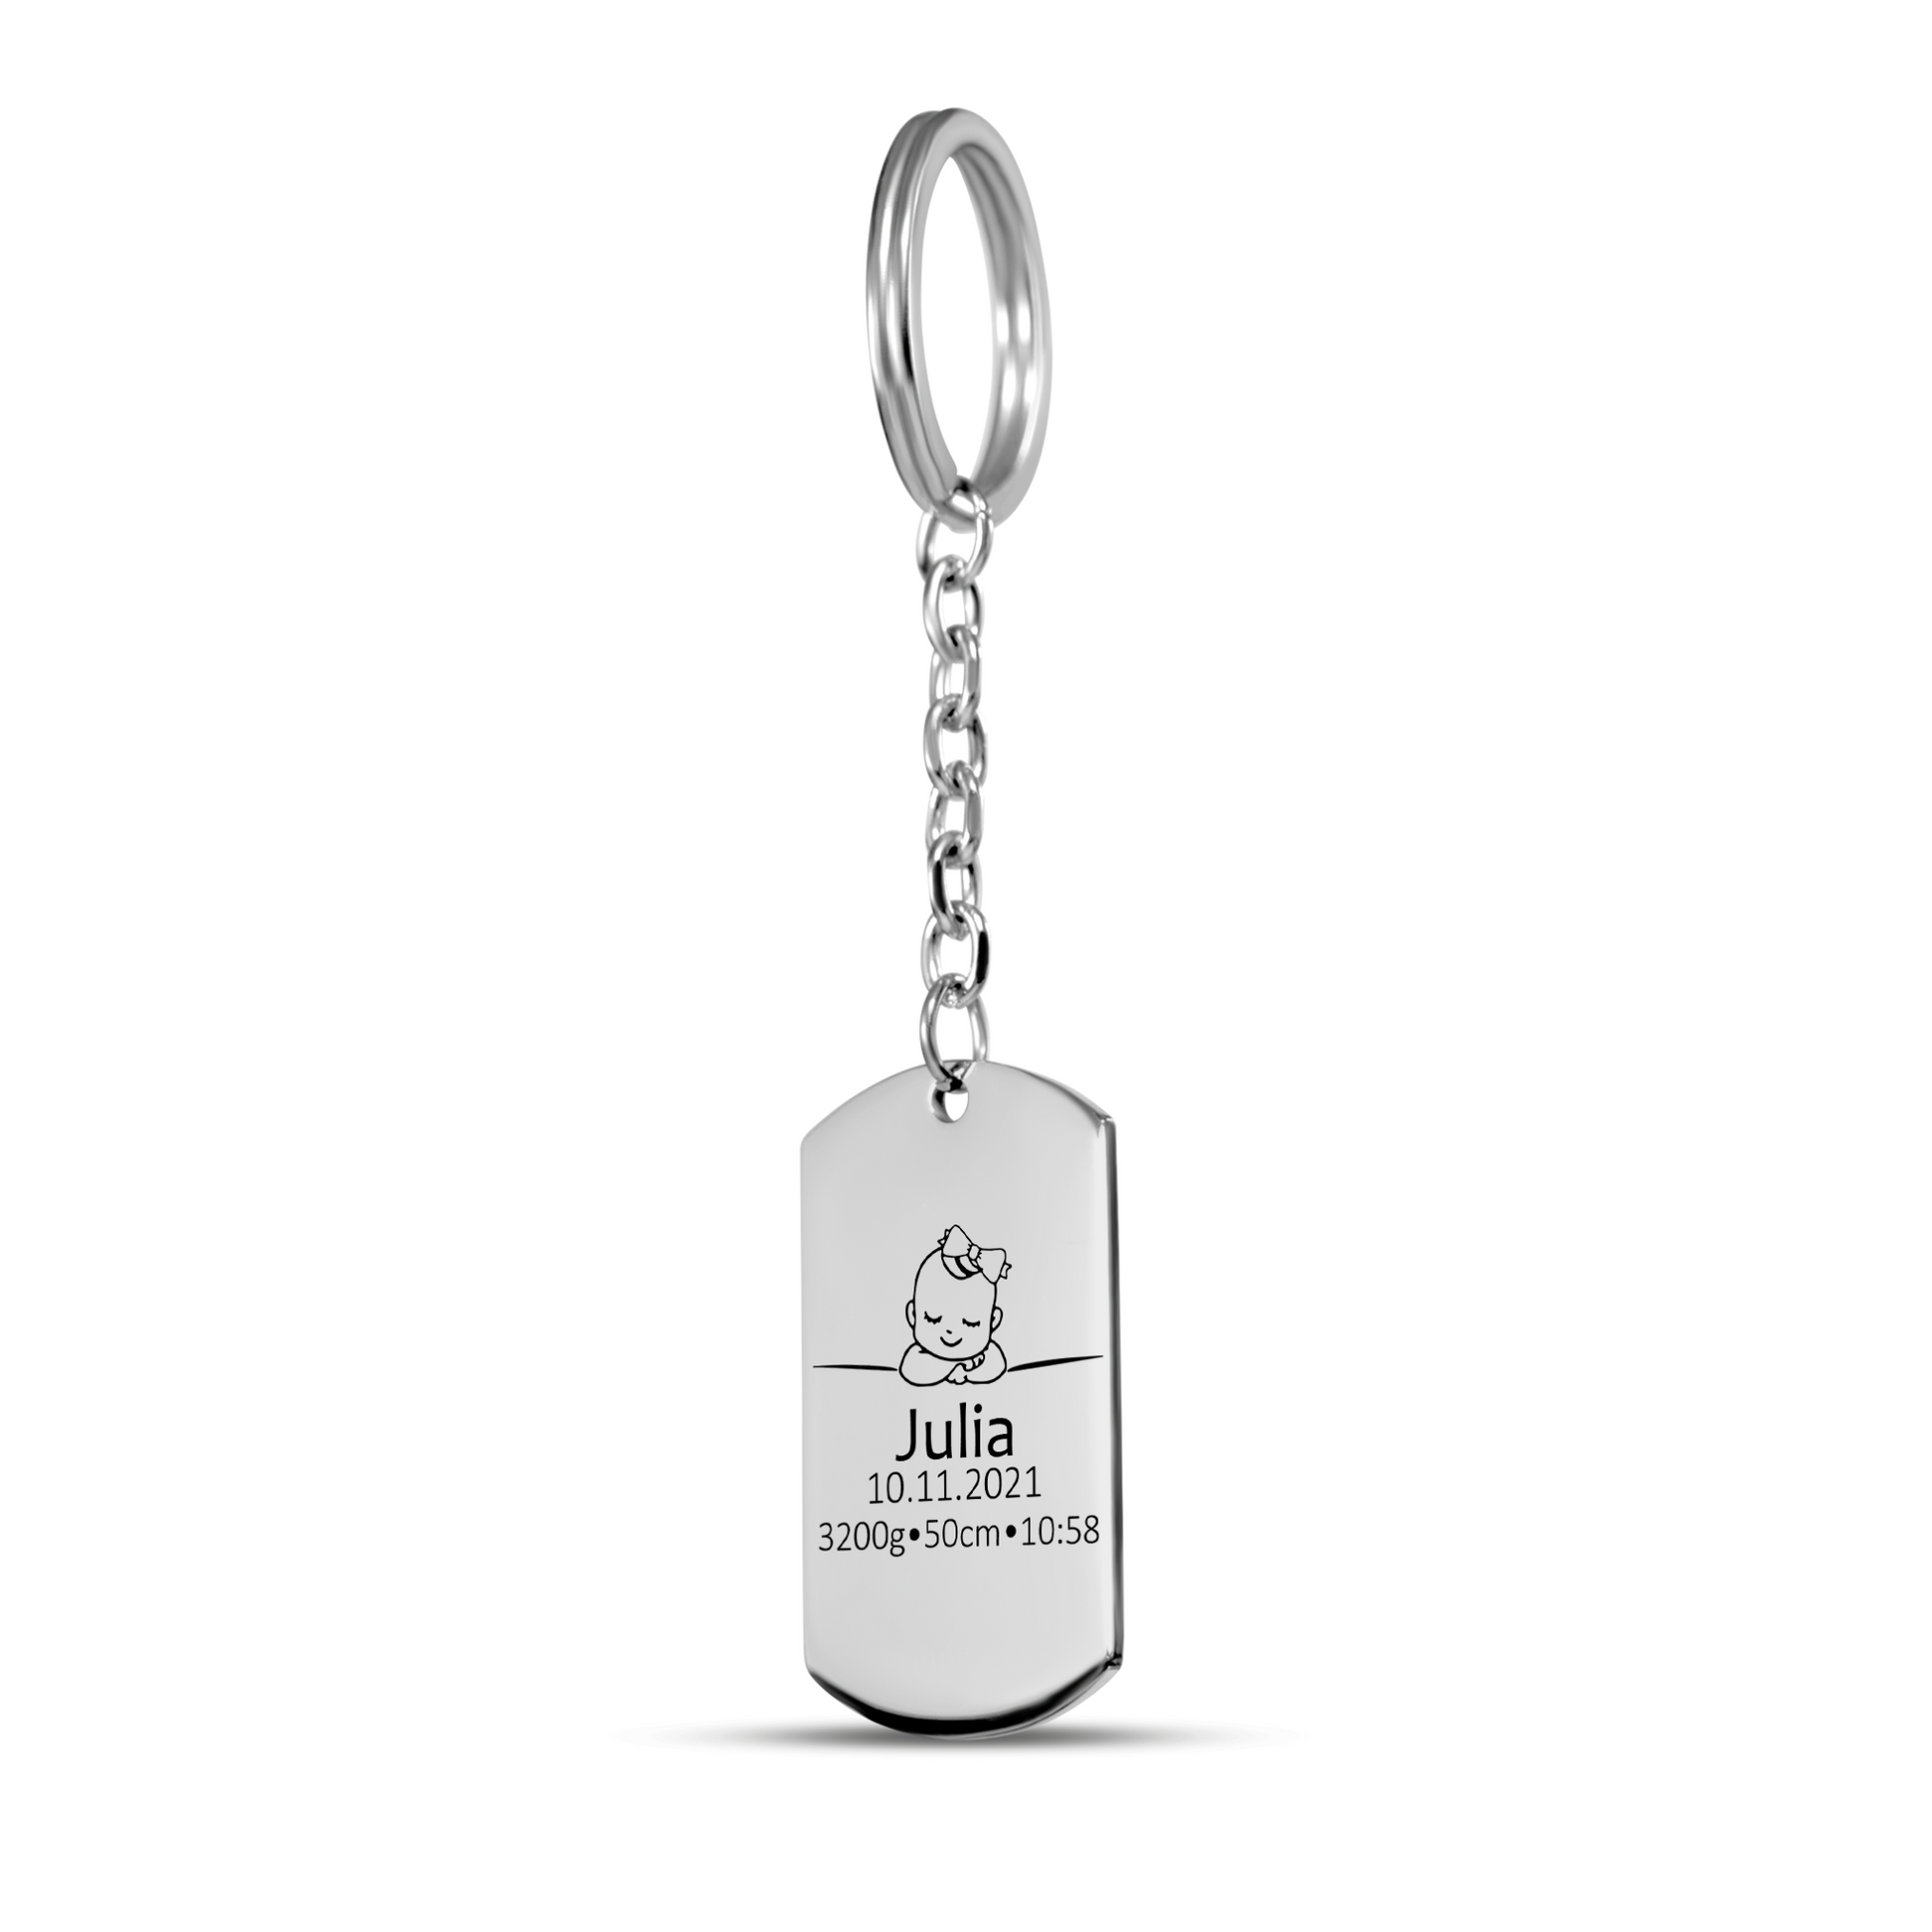 Personalized Keyrings - Girl Dad Gift - Keychain With Baby Birth Details 